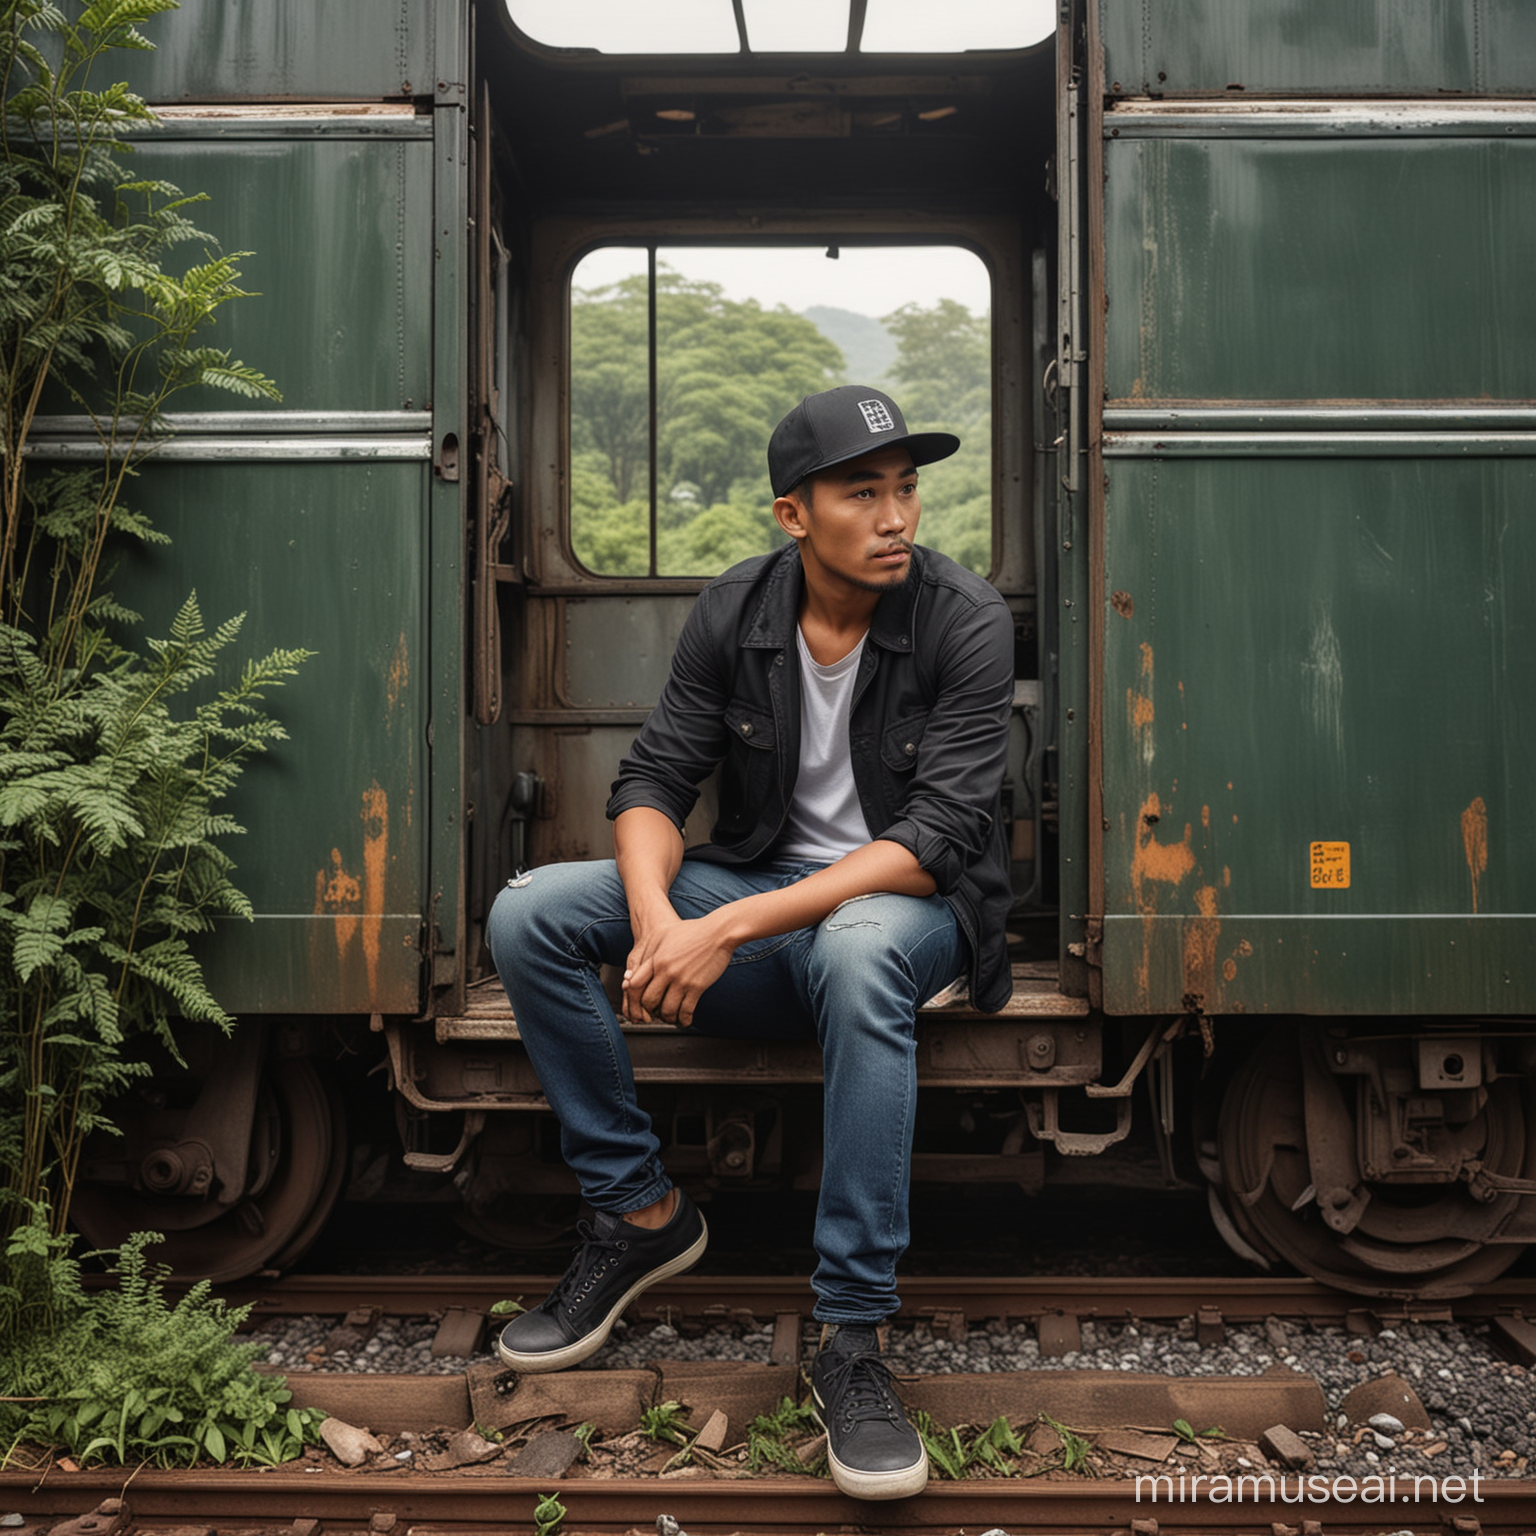 Handsome Indonesian Man Sitting at Door of Abandoned Train Carriage in Rainforest